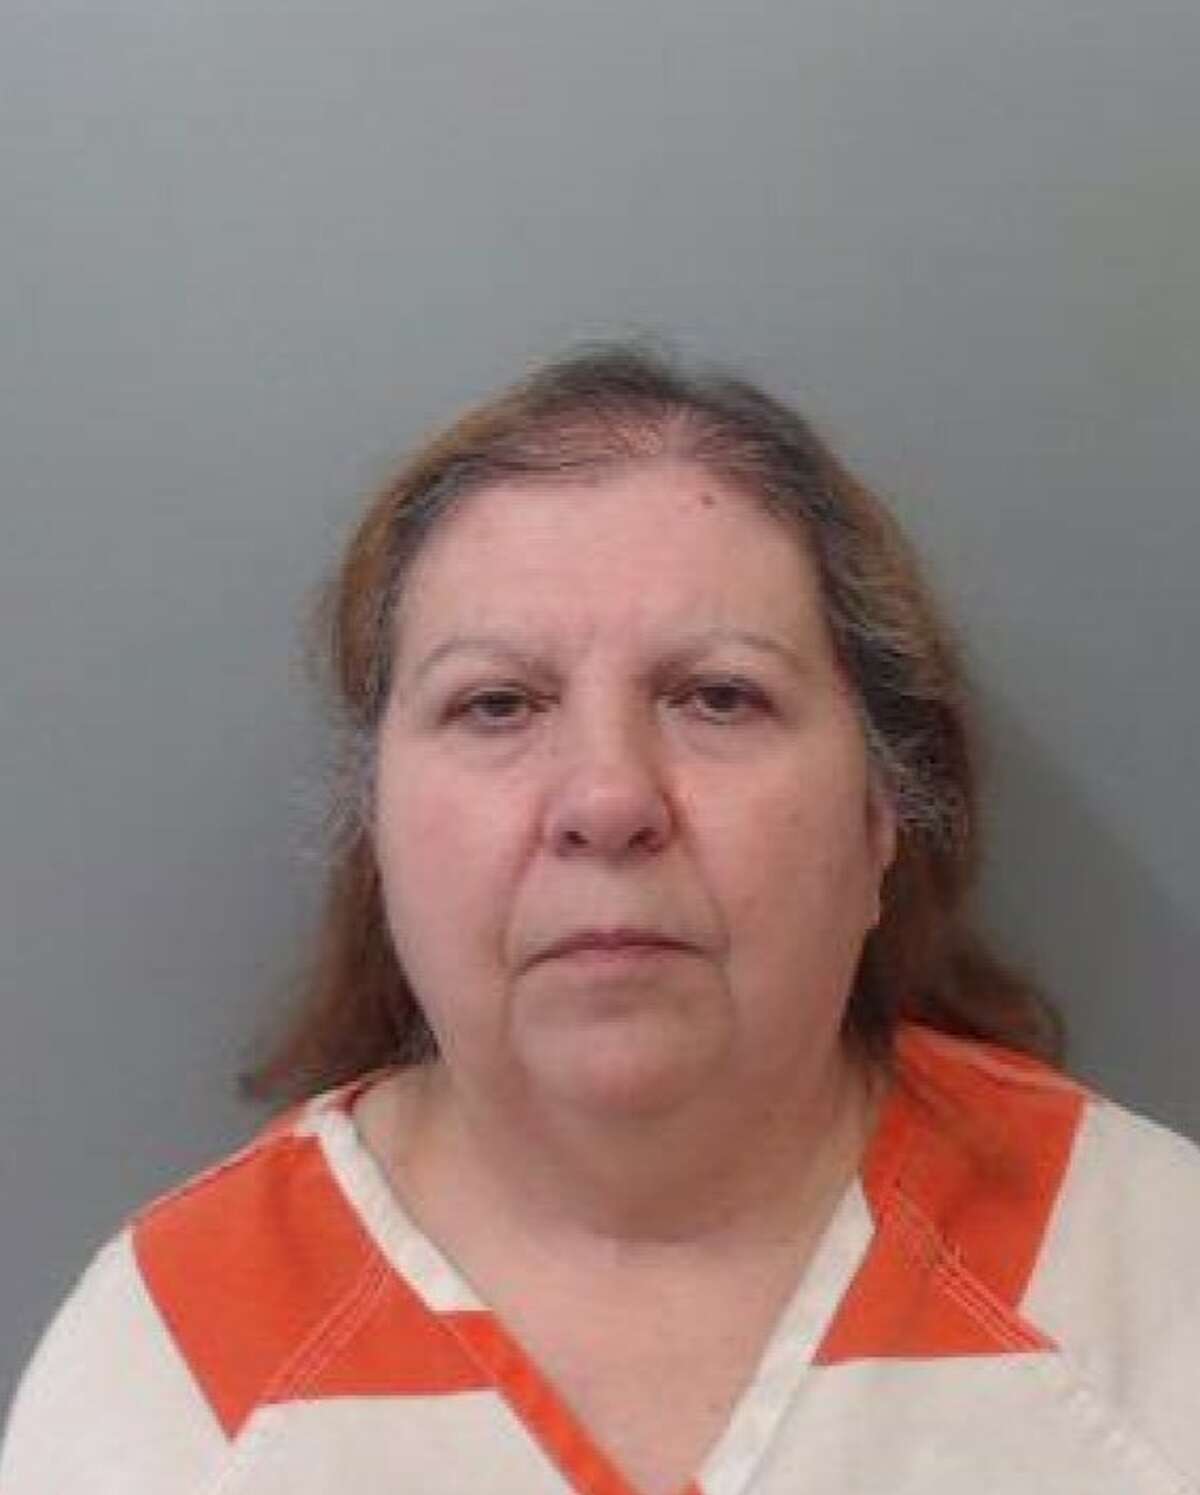 Gloria de Leon Diaz, 61, was served with an arrest warrant on Monday and charged with theft of property.